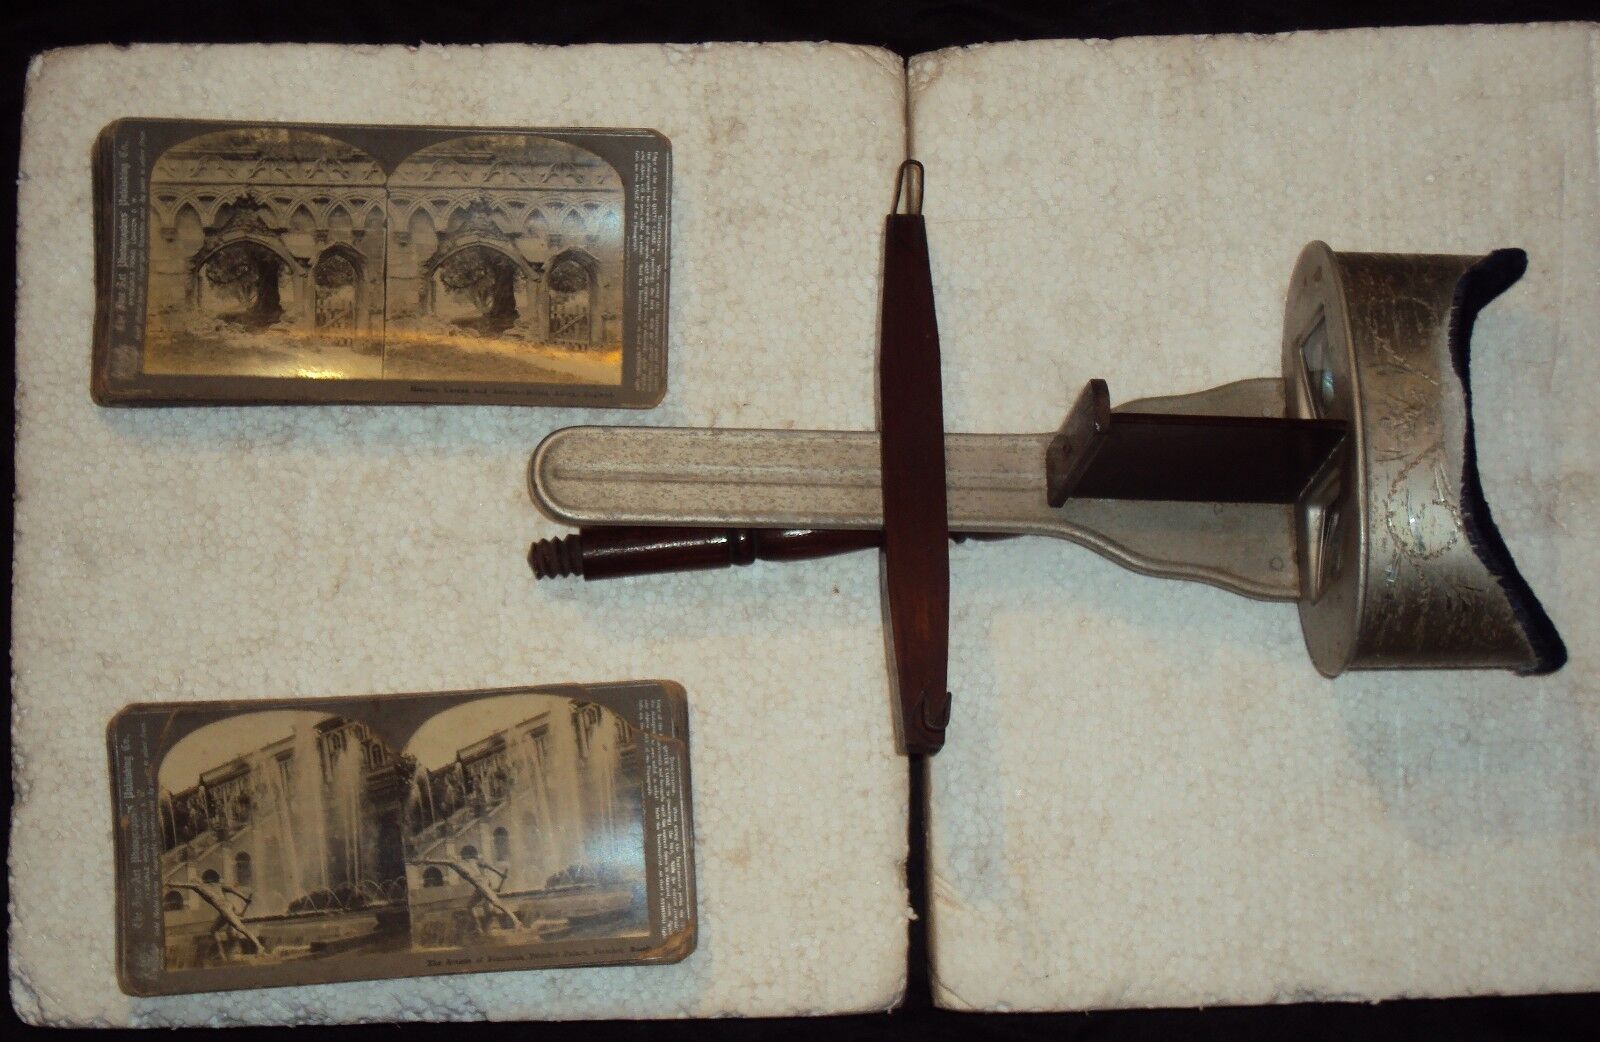 STEREO SCOPE Antique Vintage Wood Stereo Viewer Picture Slides With Stereo Card 